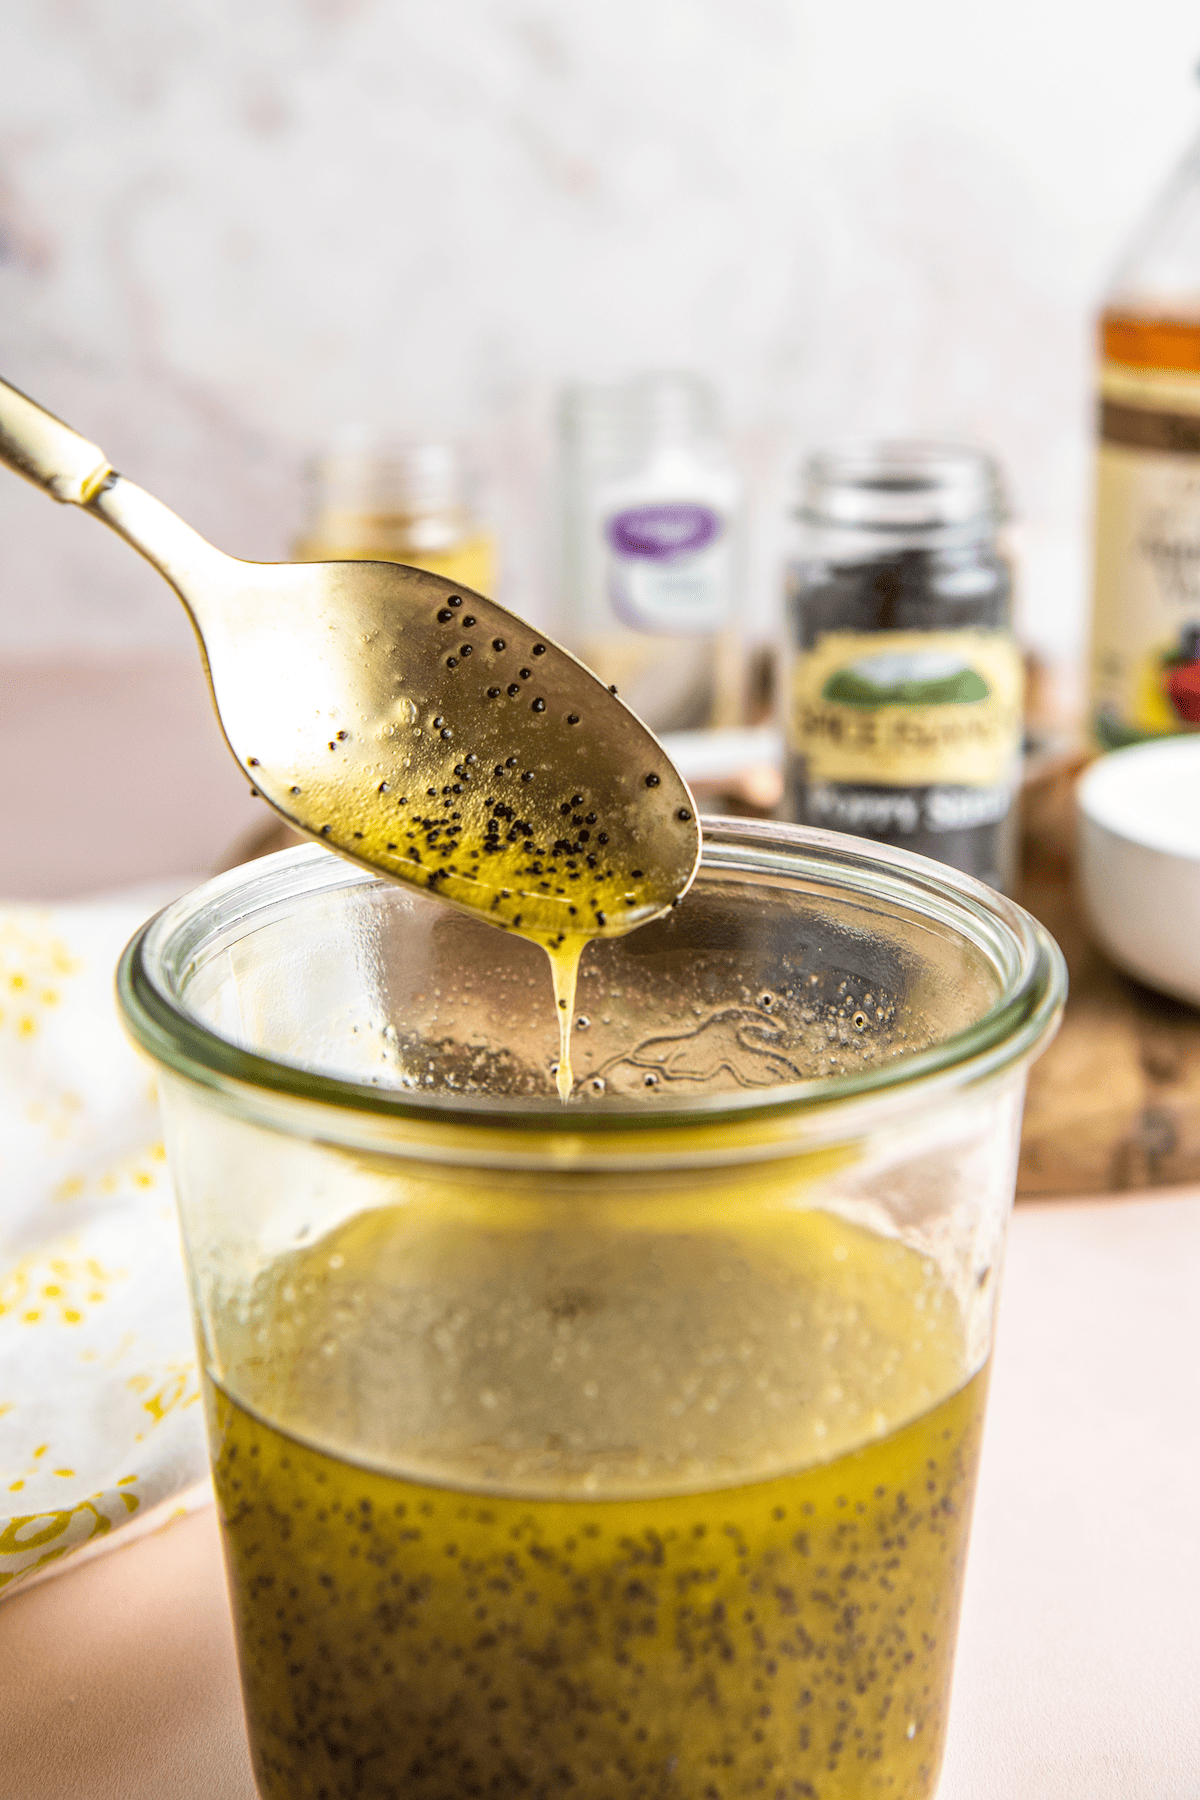 Spoonful of poppy seed salad dressing.